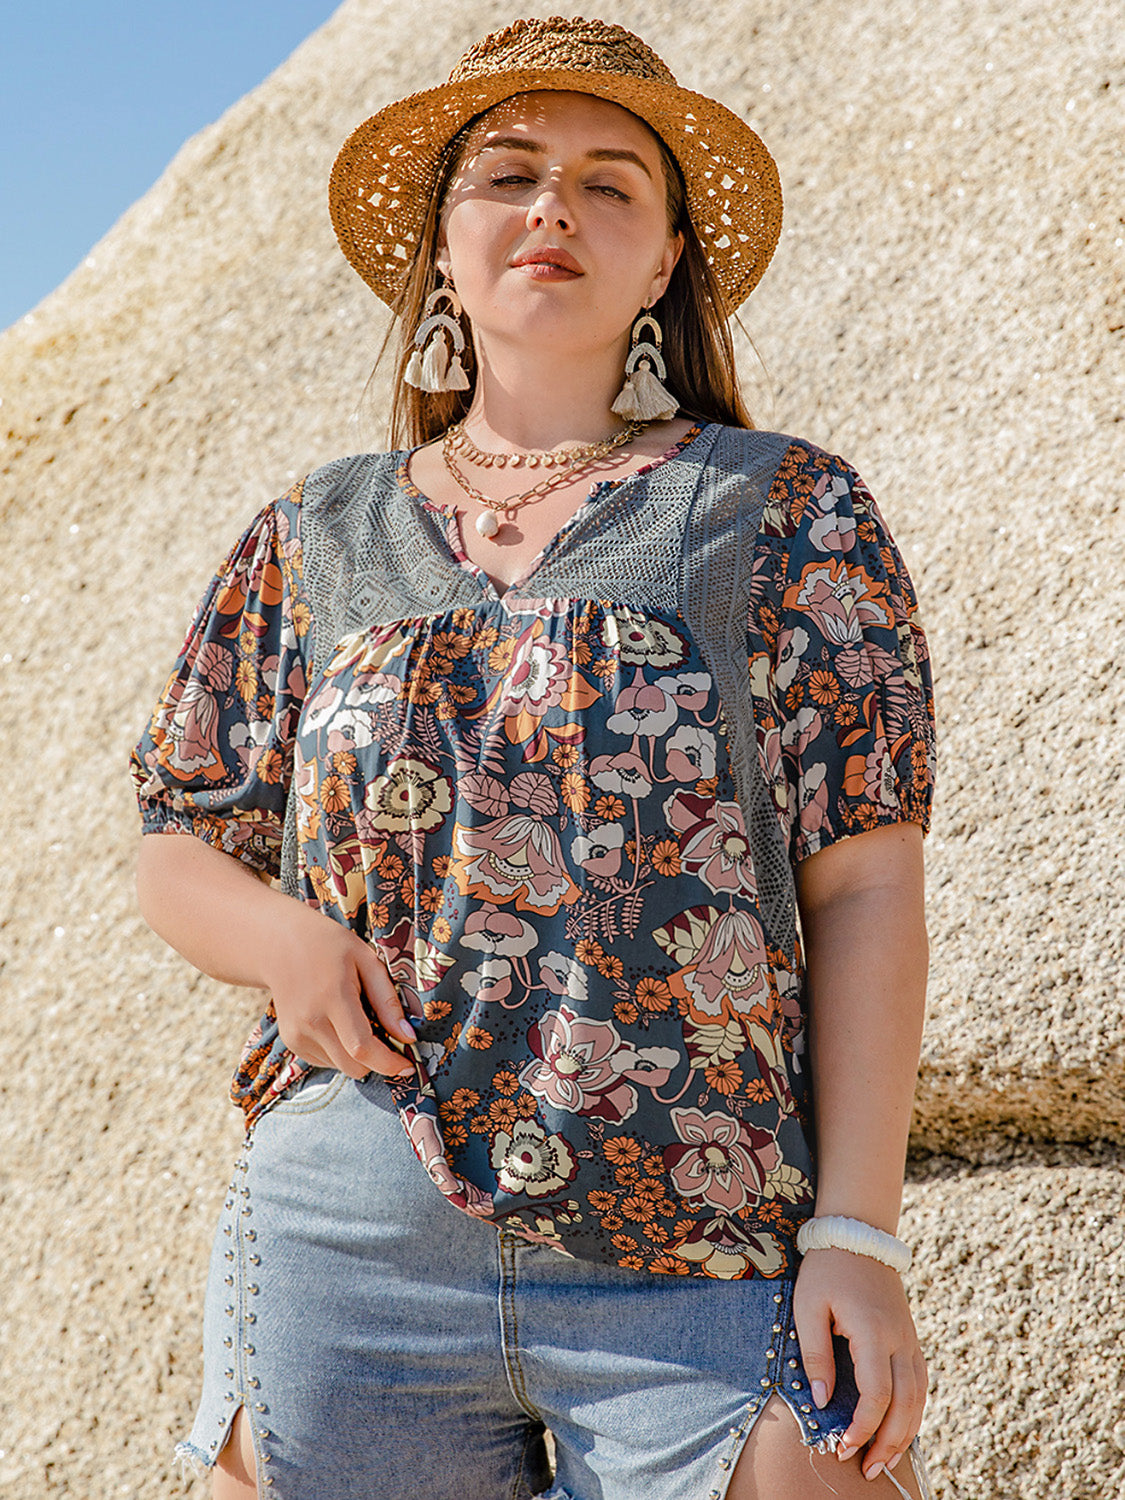 Boho-style plus size blouse with colorful floral design